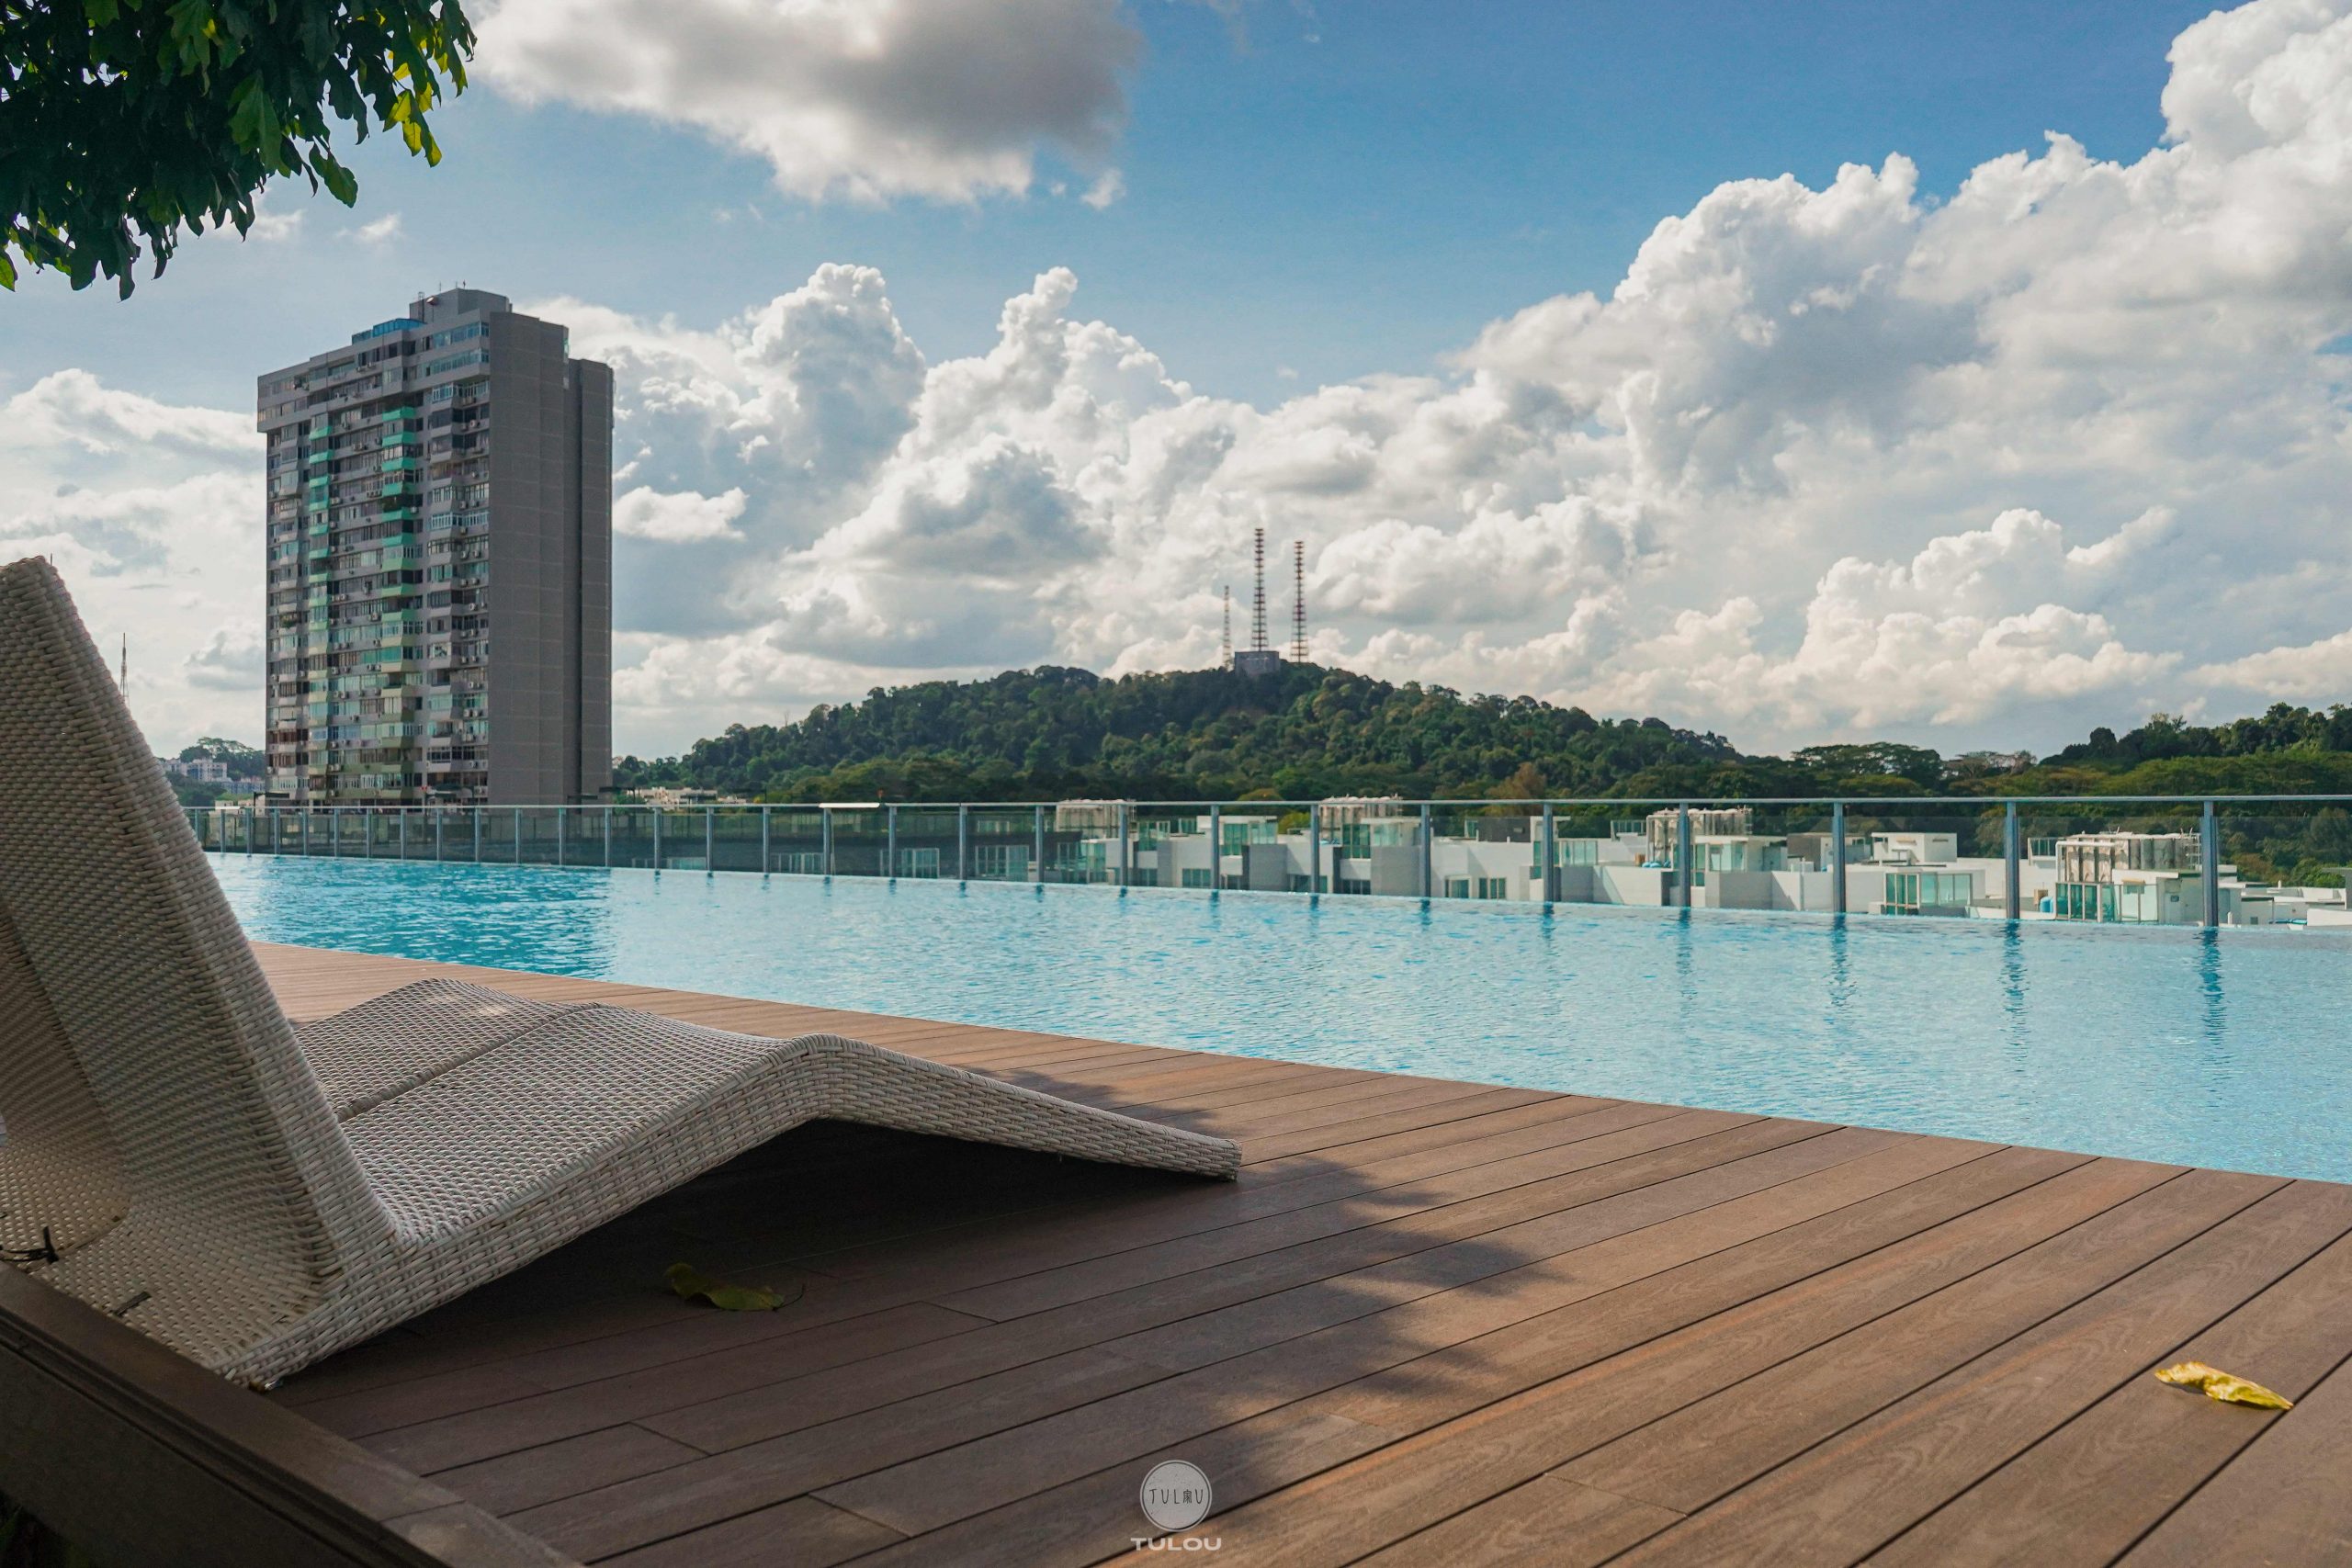 Tulou Composite Timber Decking Singapore Jardin watermark scaled - Composite Timber Decking: The Perfect Addition To Your Outdoor Living Space in Singapore